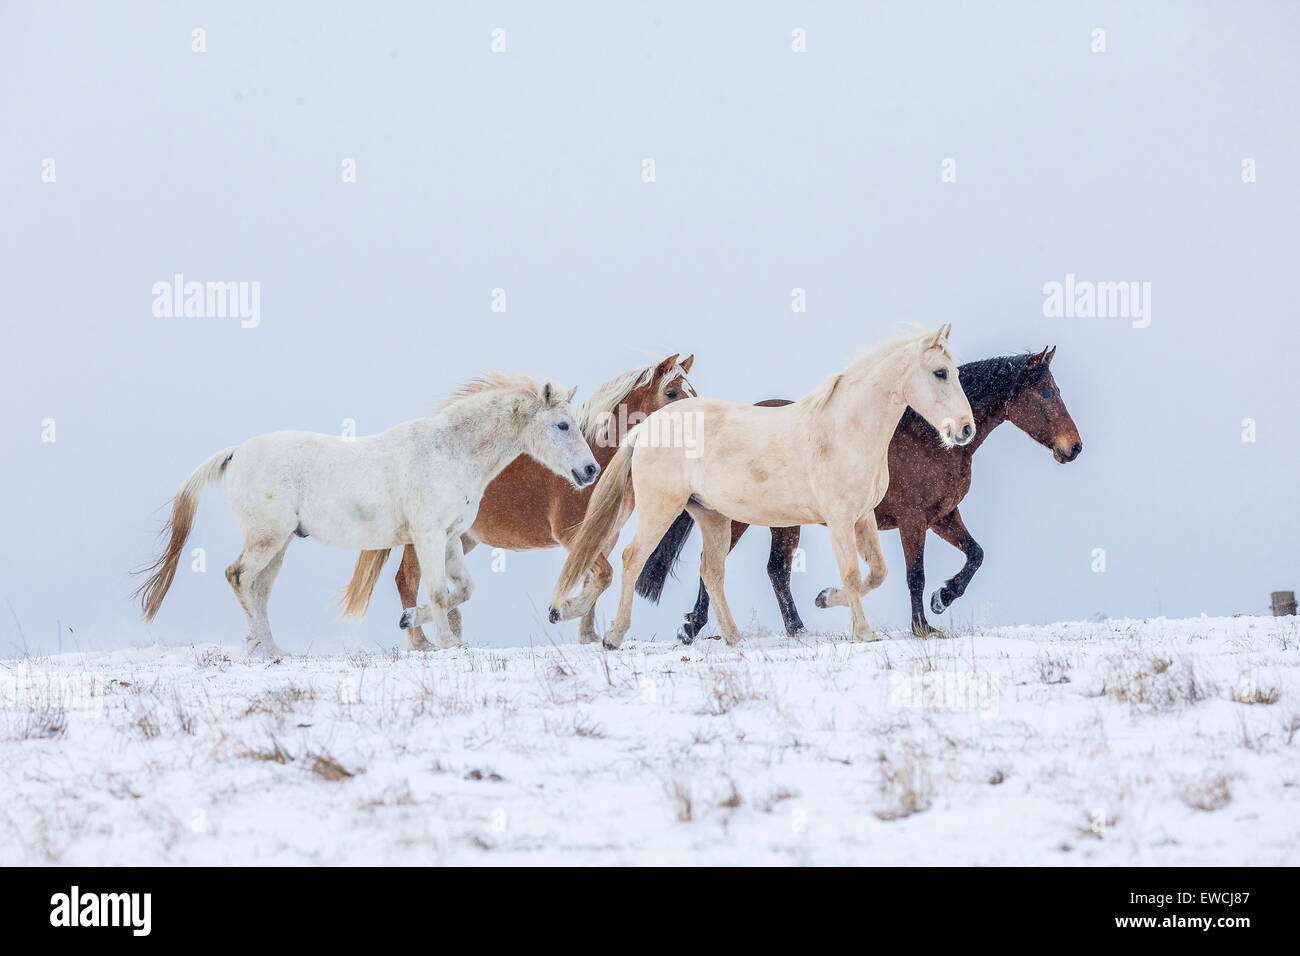 Domestic horse. Four horses trotting on a snowy pasture. Germany Stock Photo